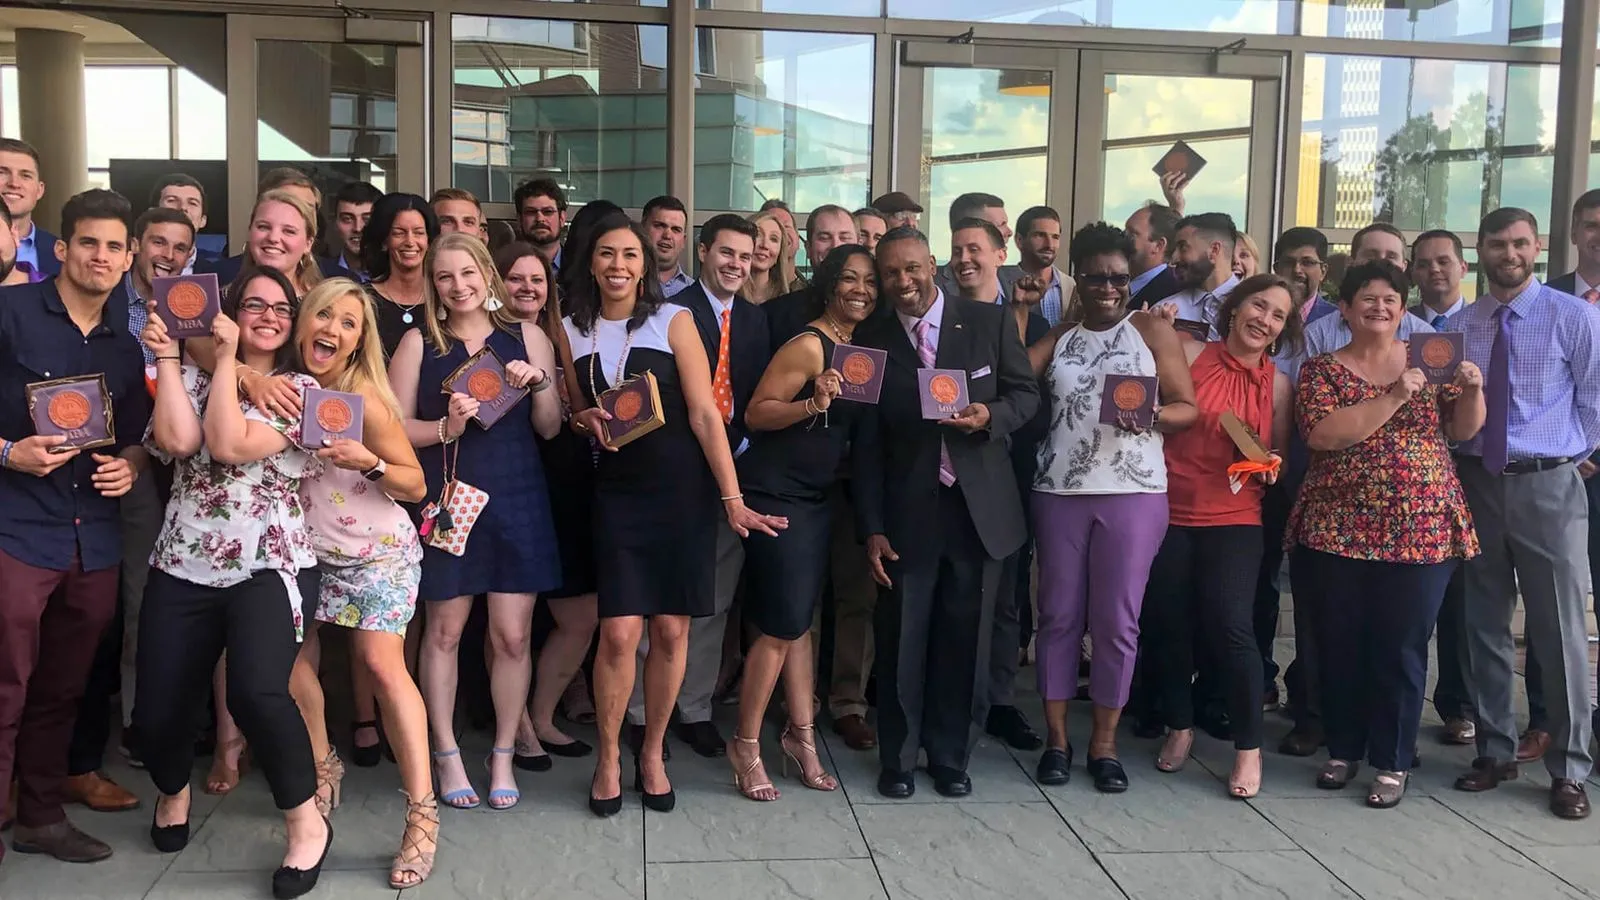 A group of MBA students gather in front of the Greenville One building to celebrate their upcoming graduation from a school with a best graduate schools ranking